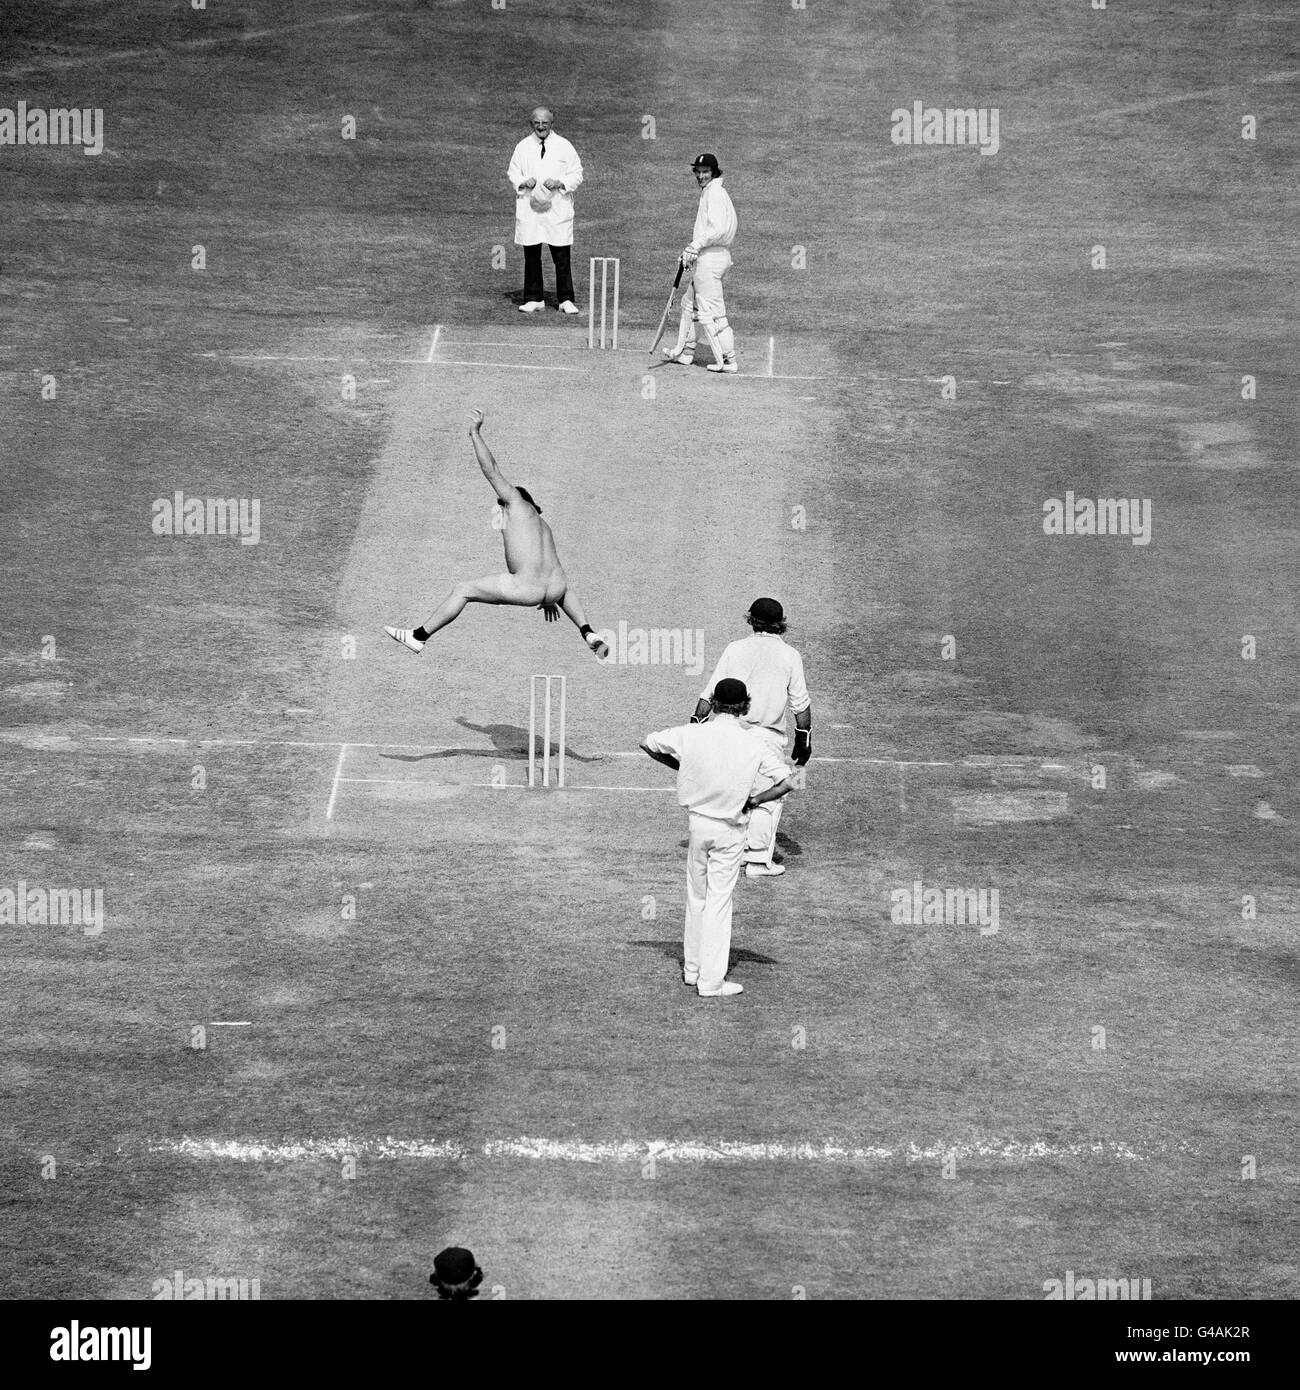 4 day cricket Black and White Stock Photos & Images - Alamy